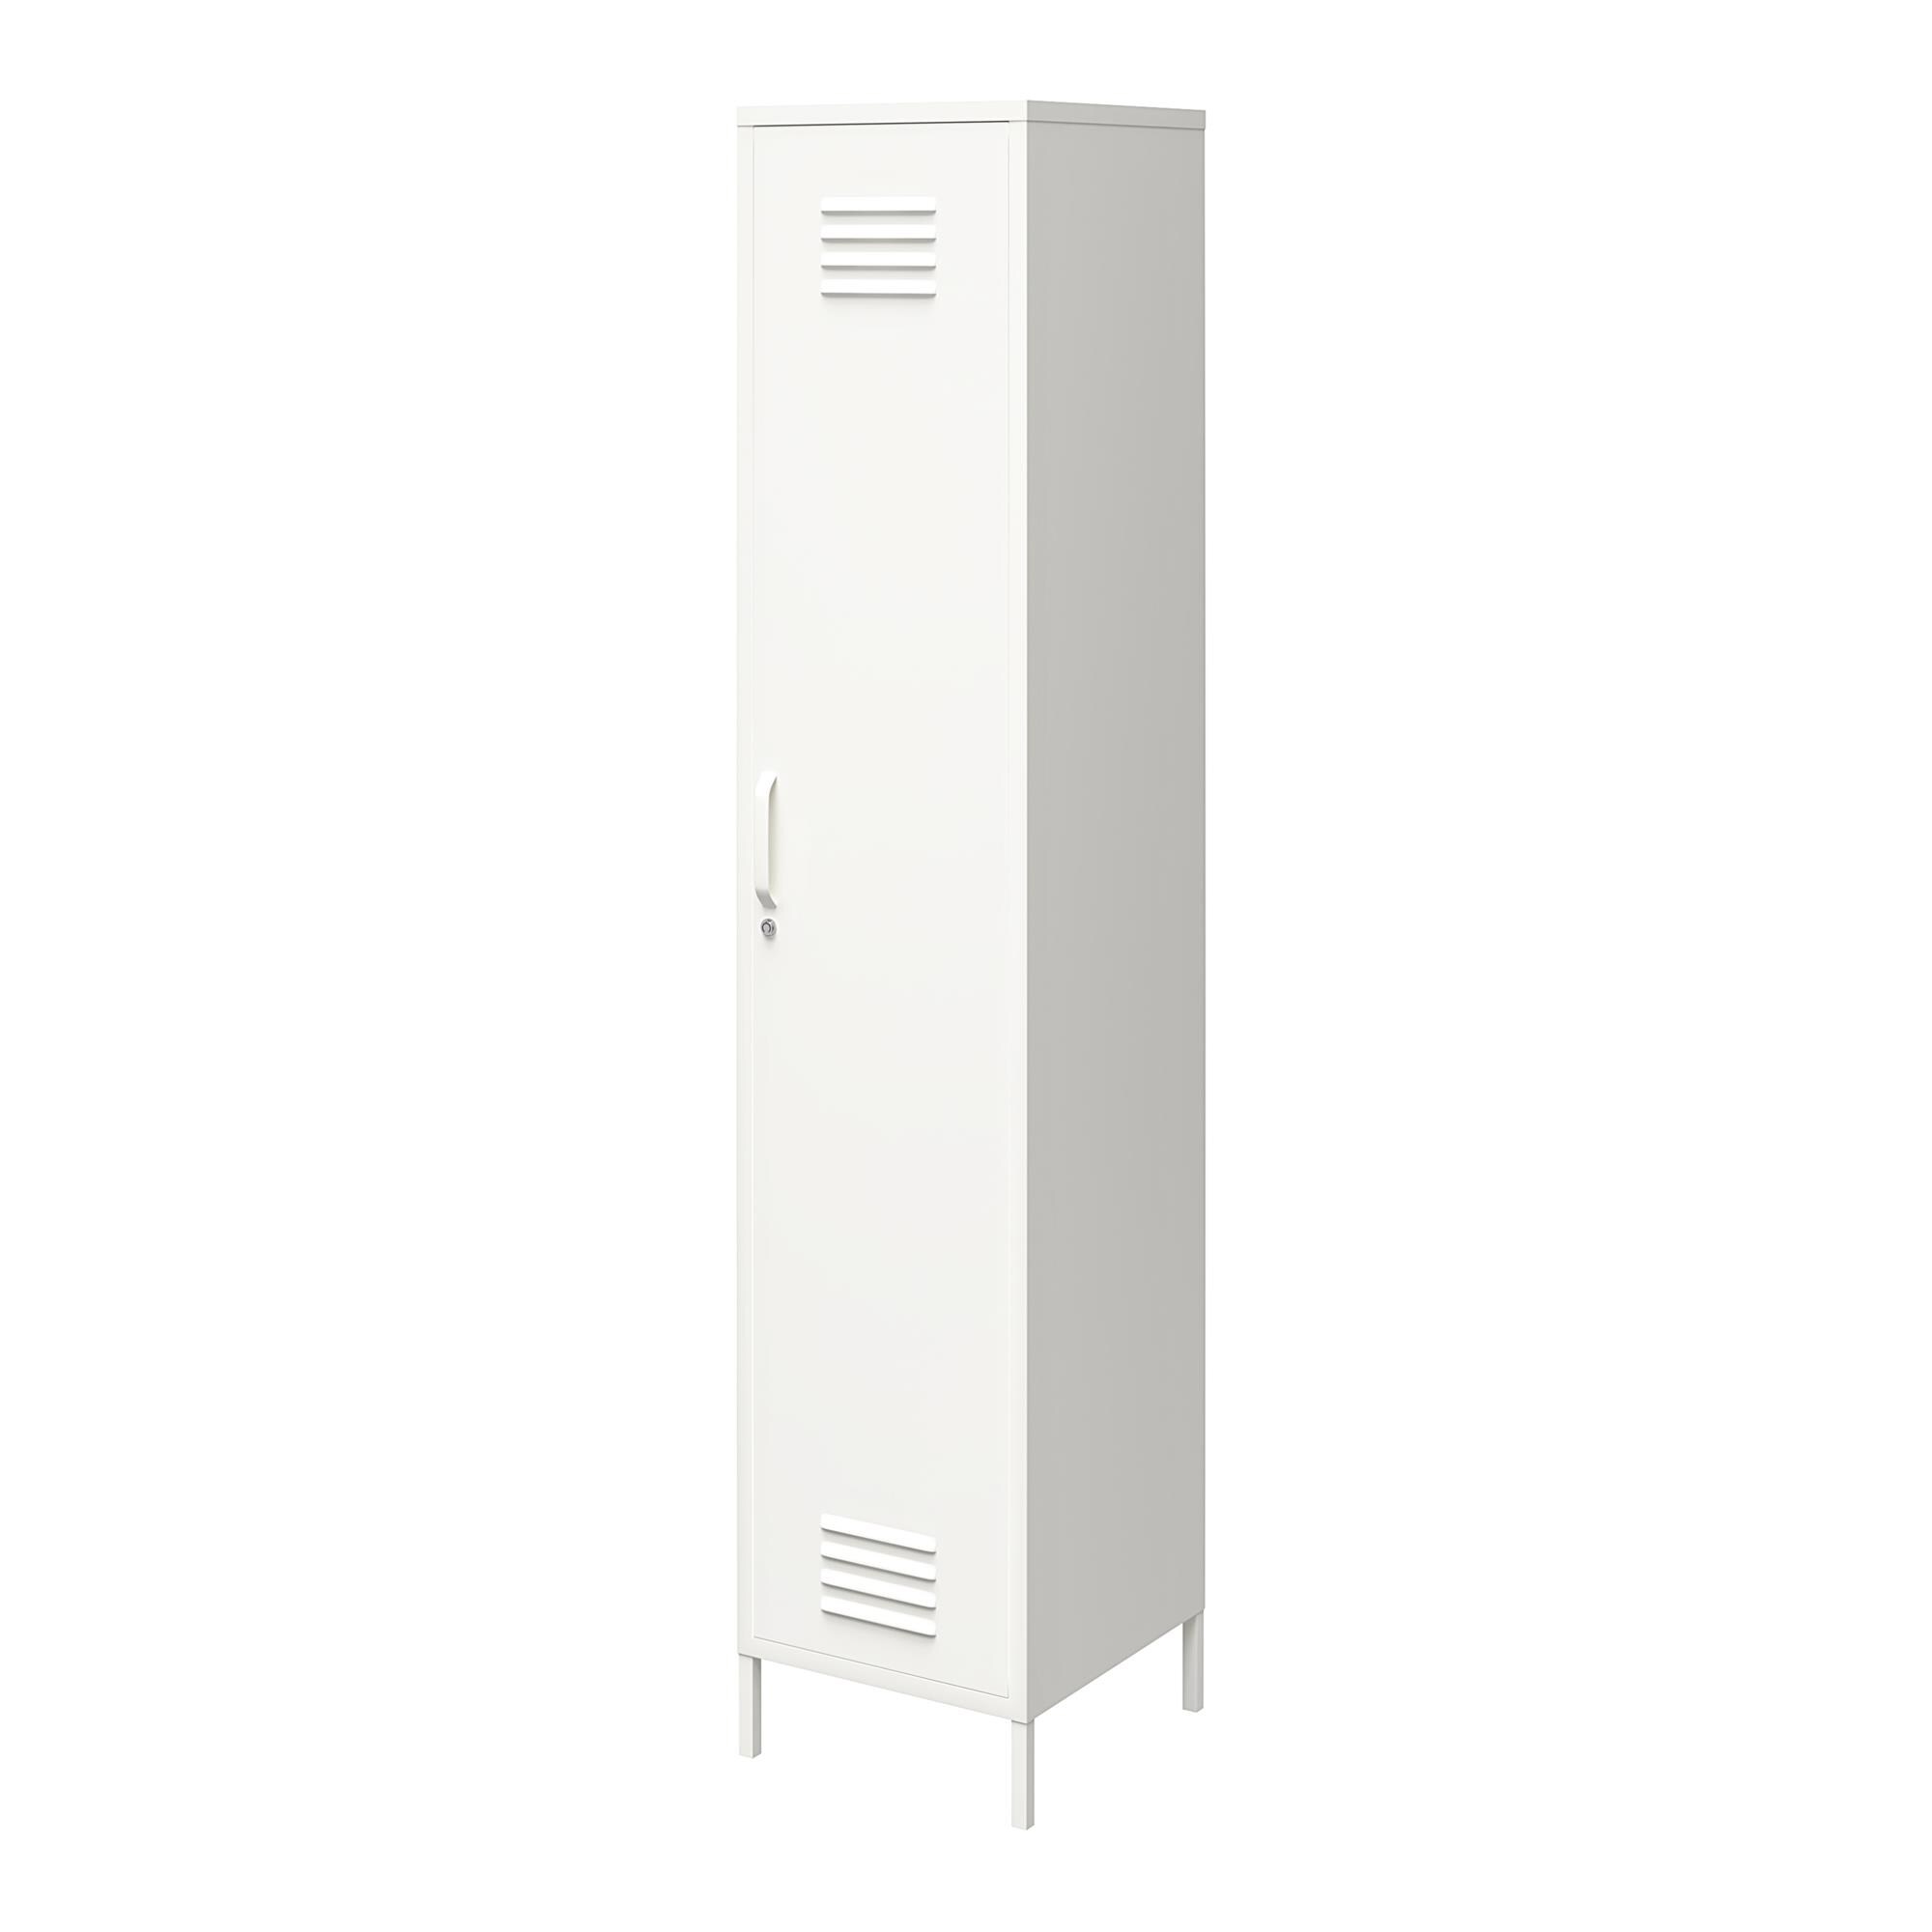 Componist Mijlpaal Birma Ameriwood Home SystemBuild Bonanza Single Metal Locker Storage Cabinet,  White in the Lockers department at Lowes.com